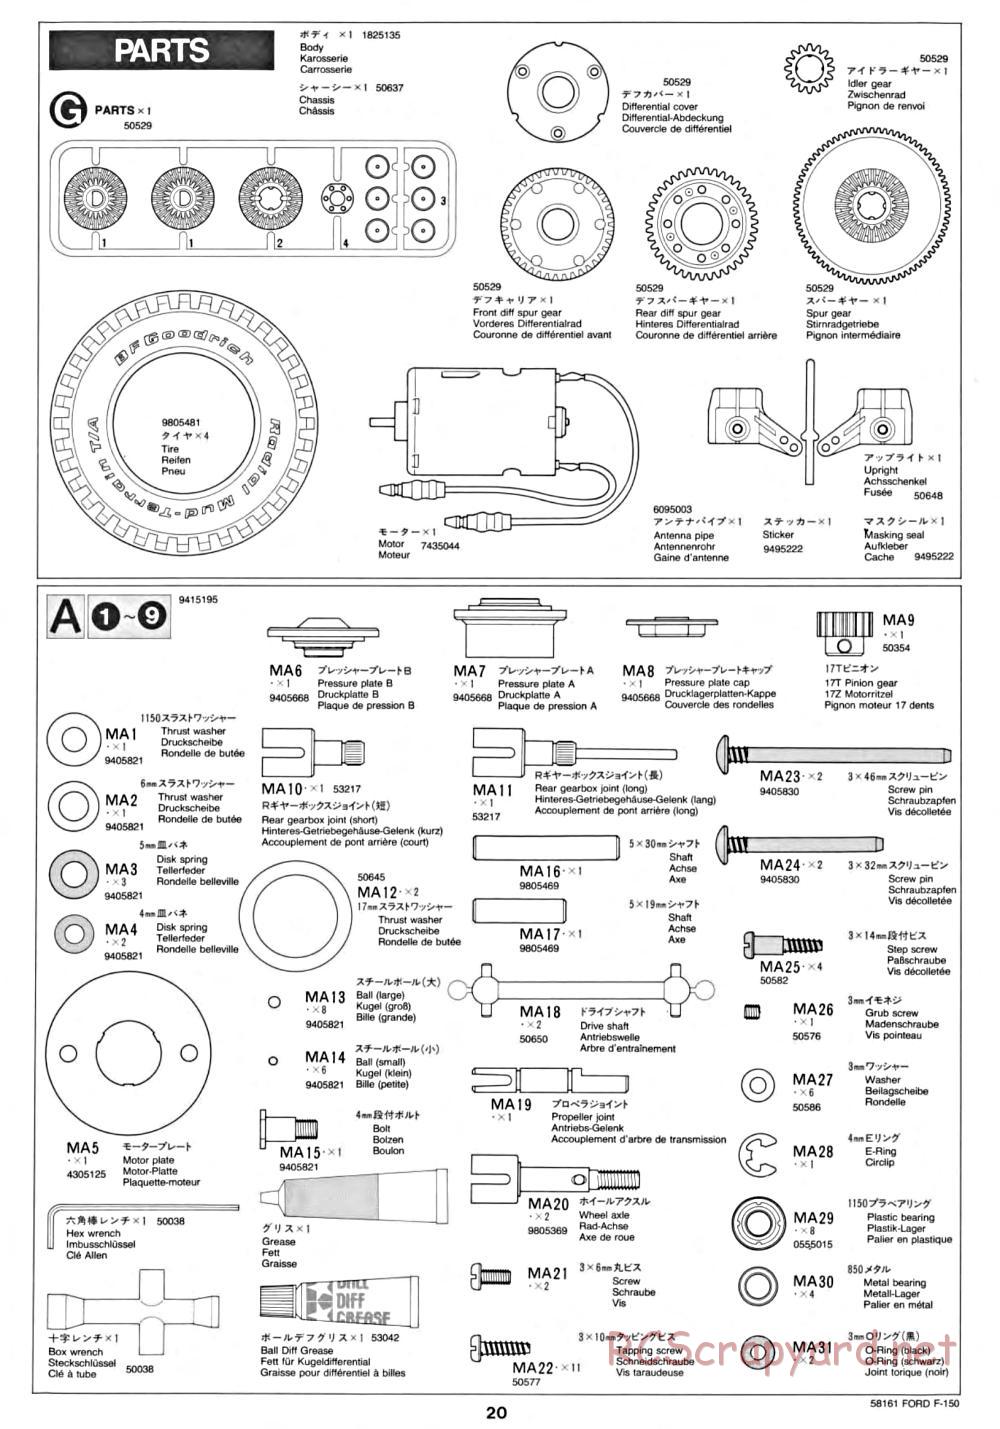 Tamiya - Ford F-150 Truck Chassis - Manual - Page 20